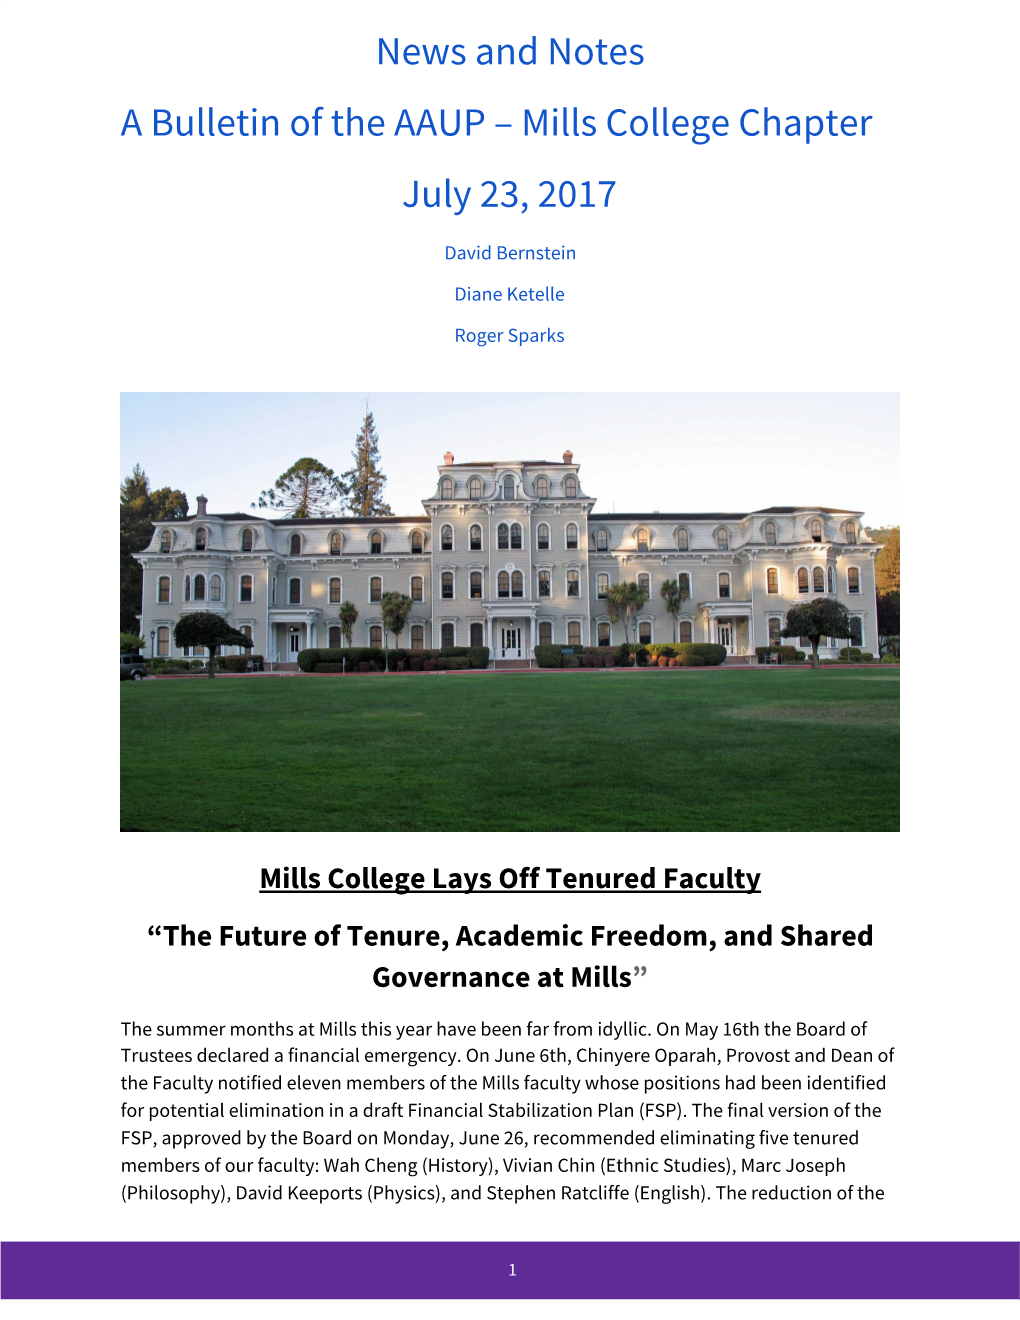 News and Notes a Bulletin of the AAUP – Mills College Chapter July 23, 2017